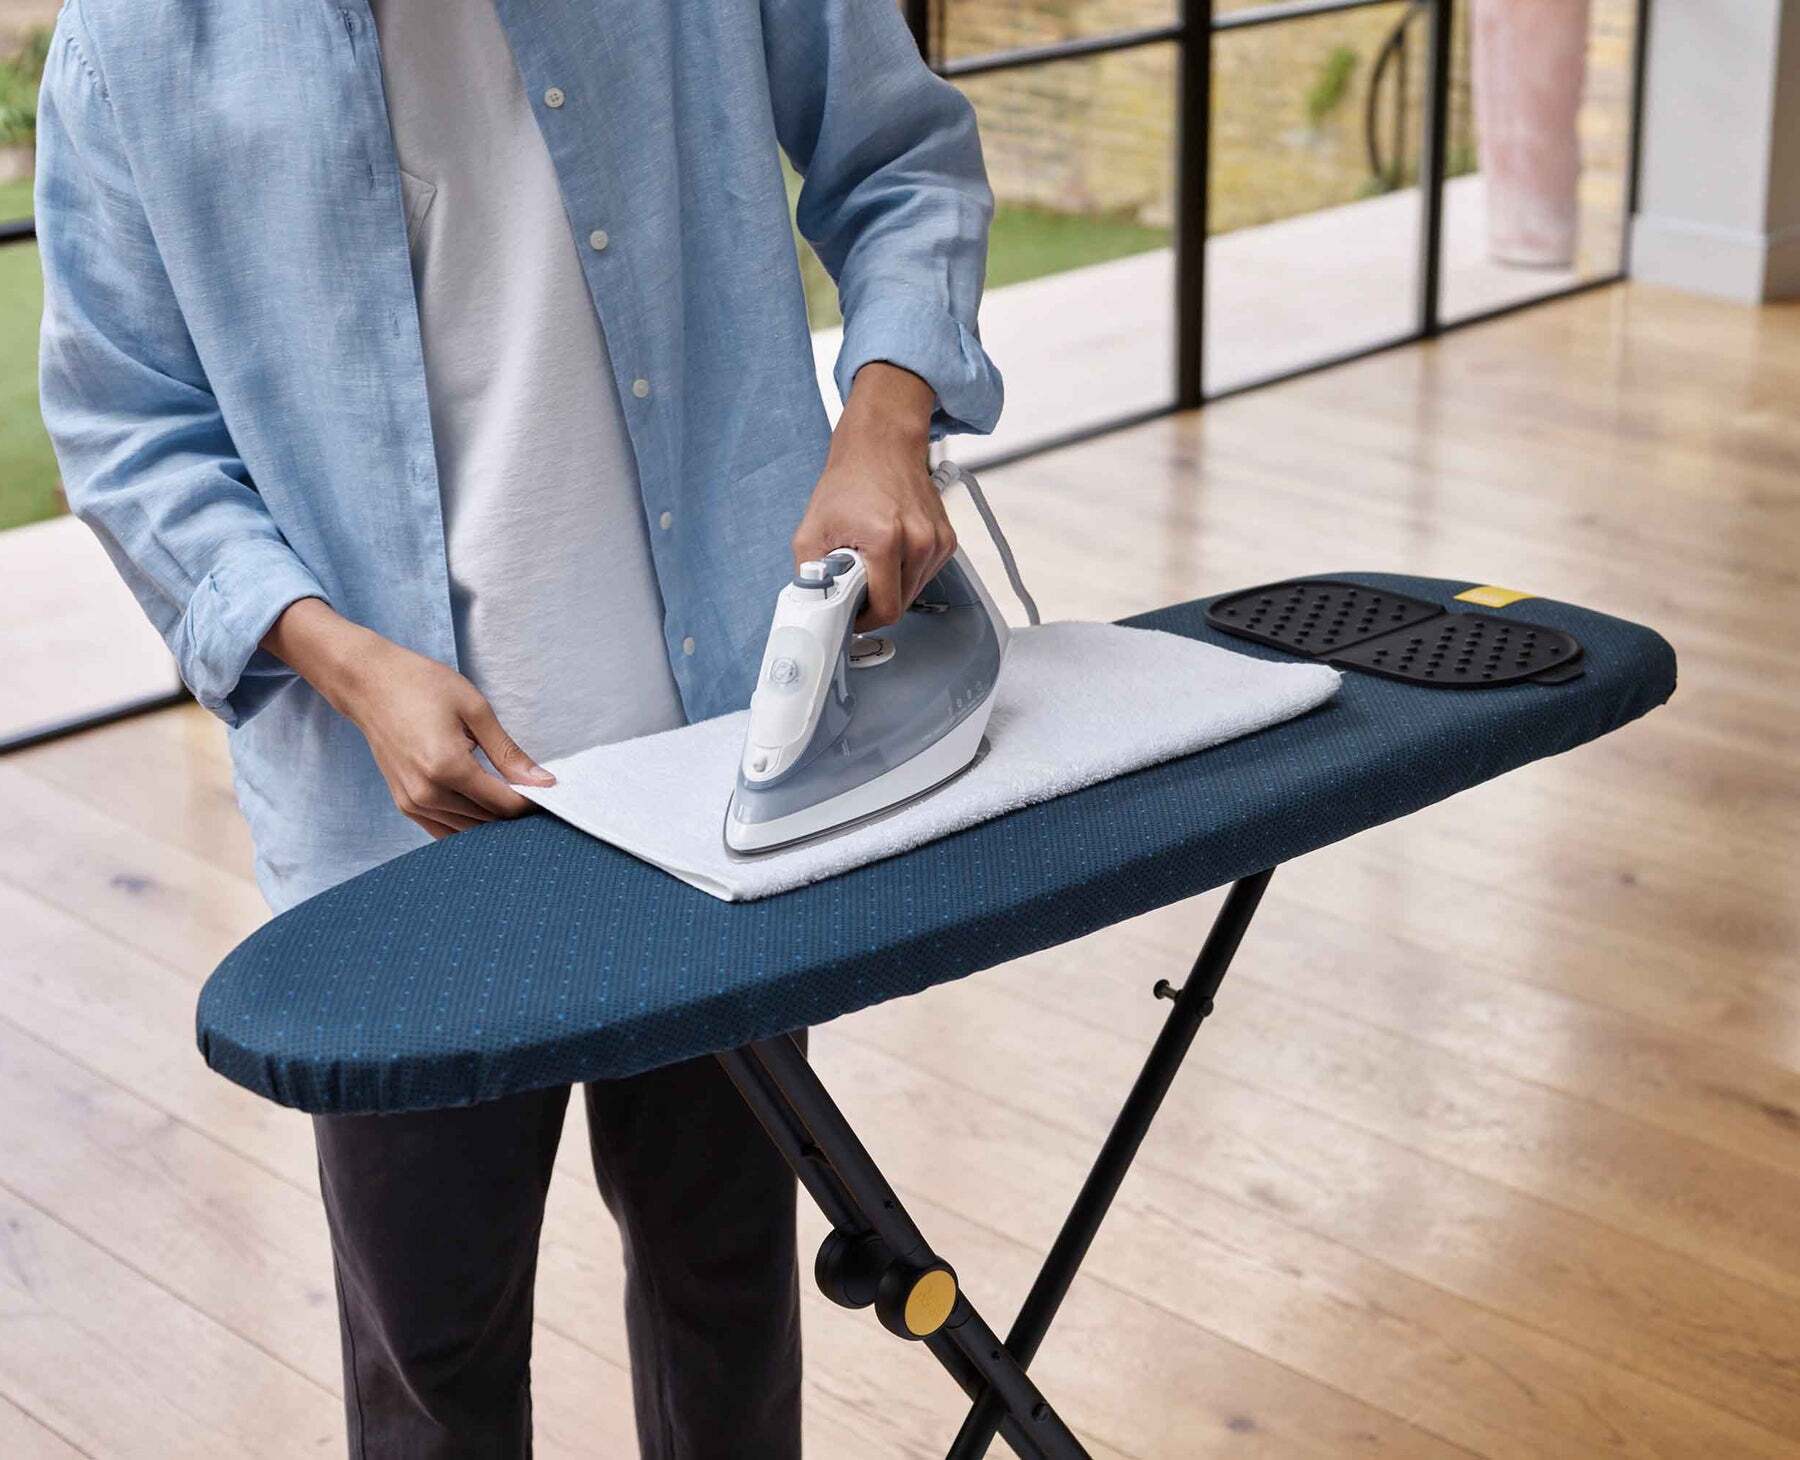 The Ultimate Ironing Board for Her: A Must-Have Appliance for Effortless Wrinkle-Free Clothes